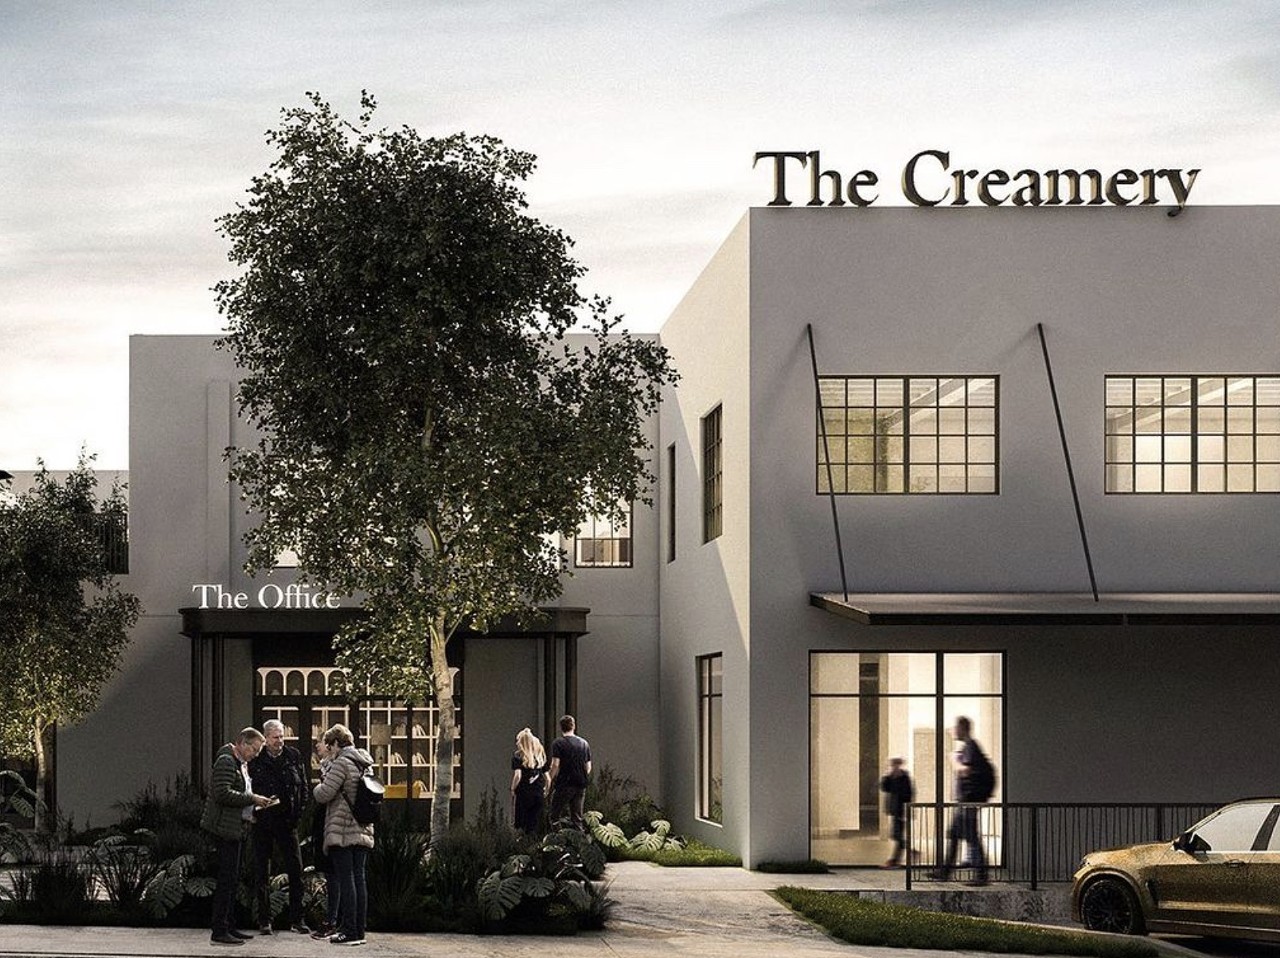 Lunatique
875 East Ashby Place 
Pearl-area complex The Creamery is set to include rooftop bar Lunatique, slated to open by late May. The 900-square-foot rooftop bar will feature a specialty drink menu — but little else is known about the enigmatic bar’s opening.